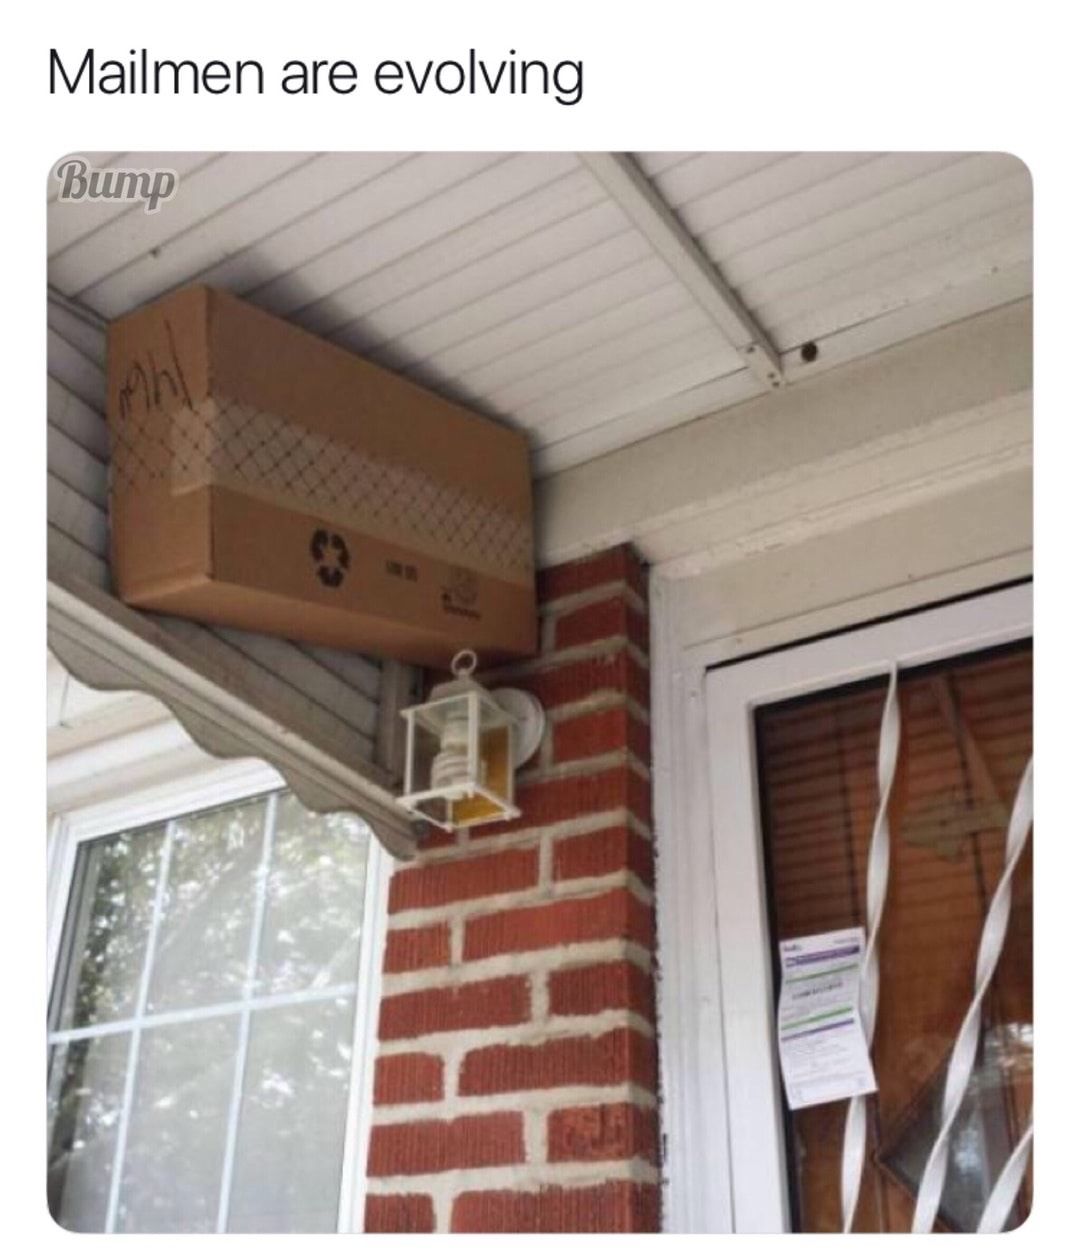 funny amazon delivery package - Mailmen are evolving Bump